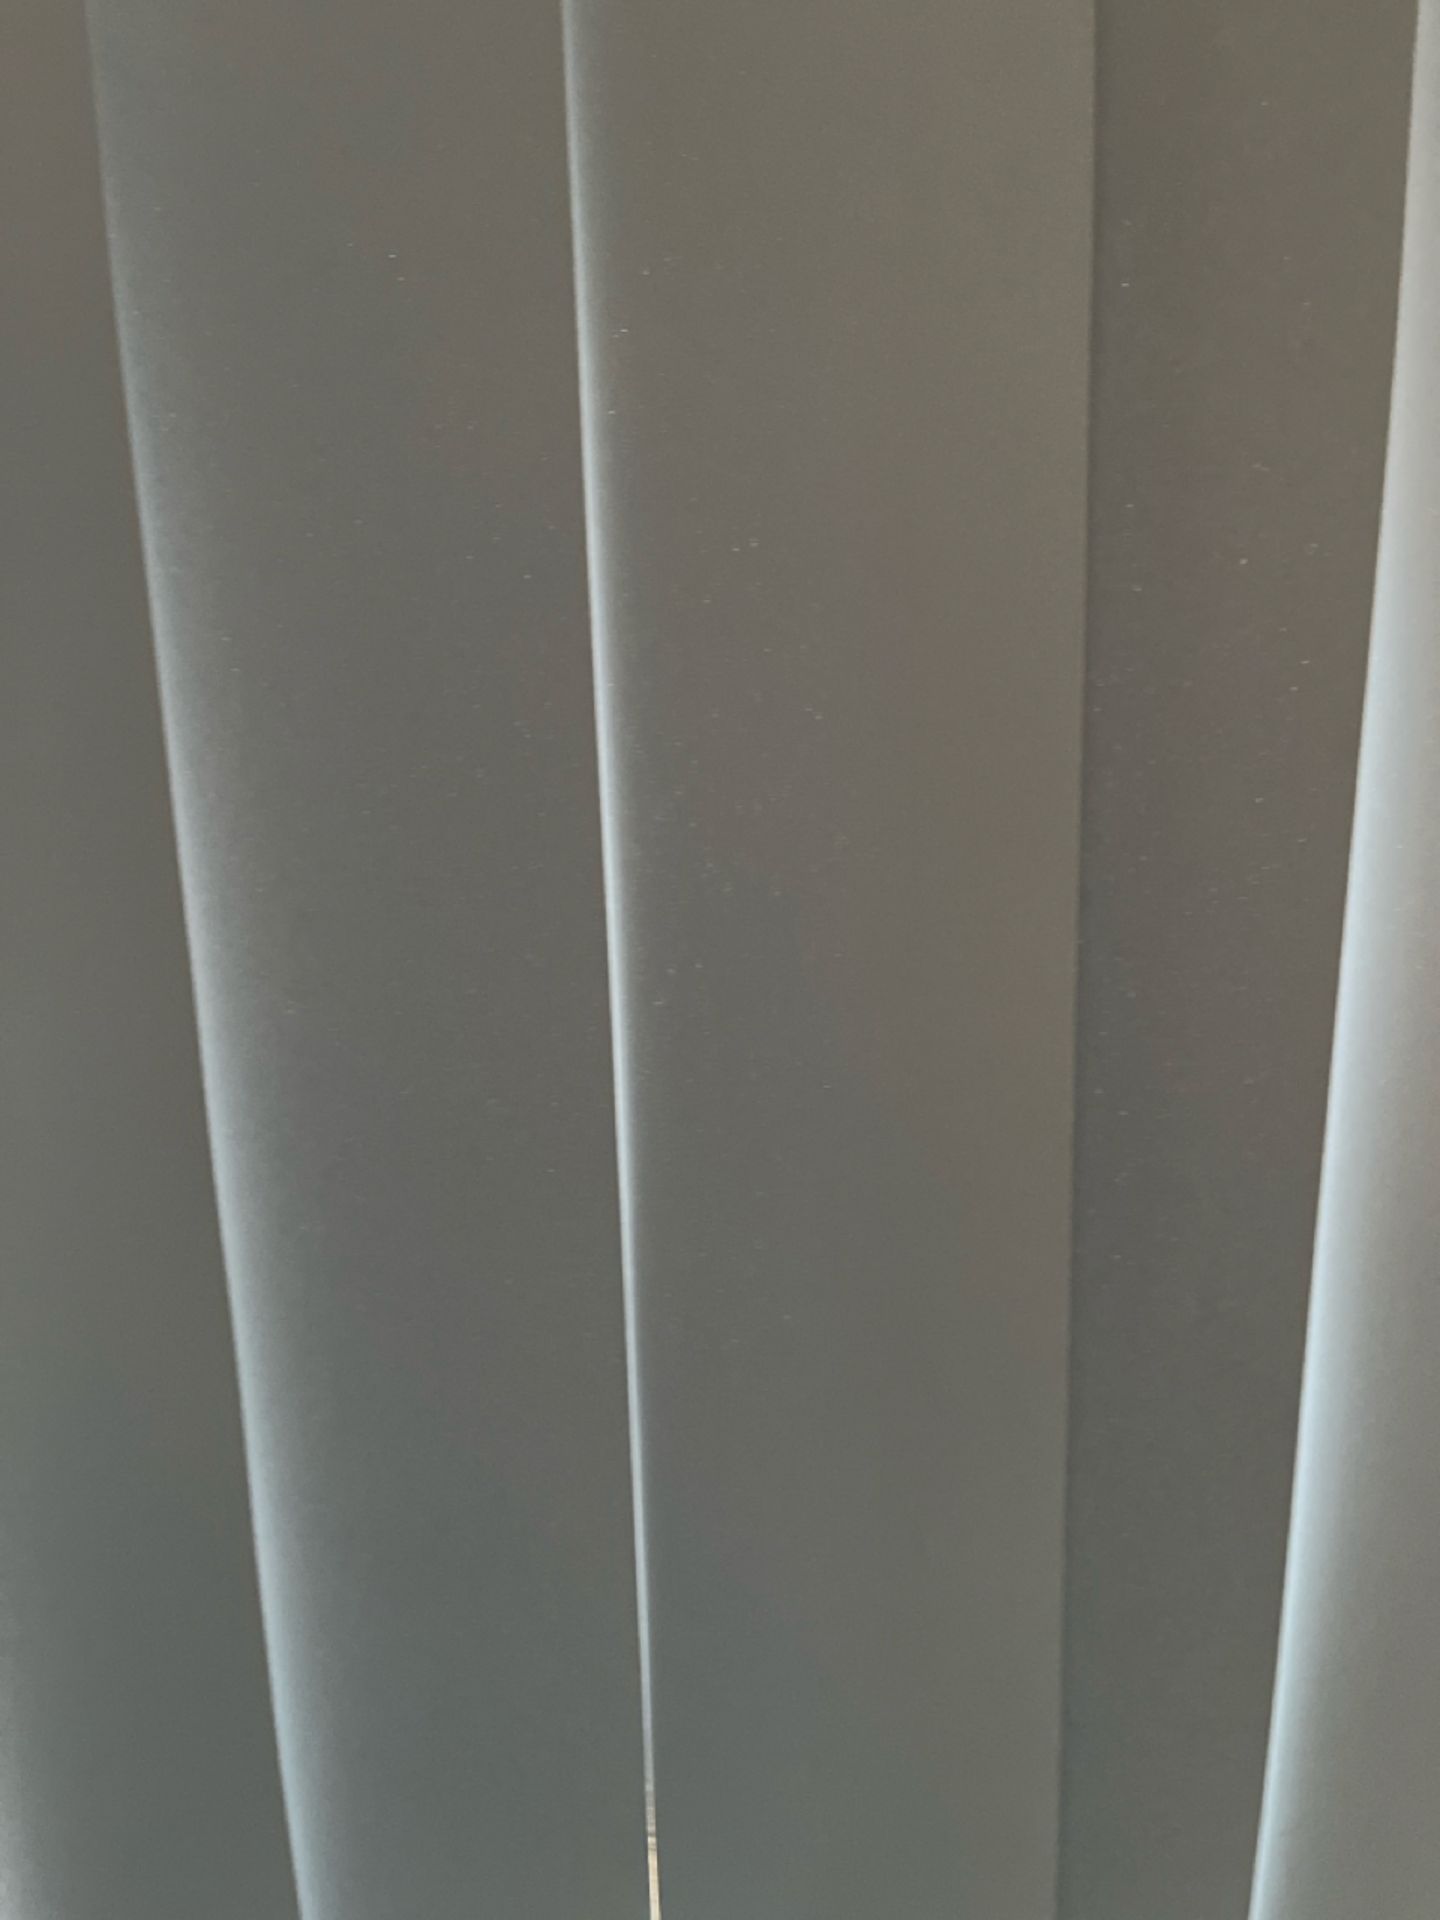 18m Of Blinds - Image 5 of 5